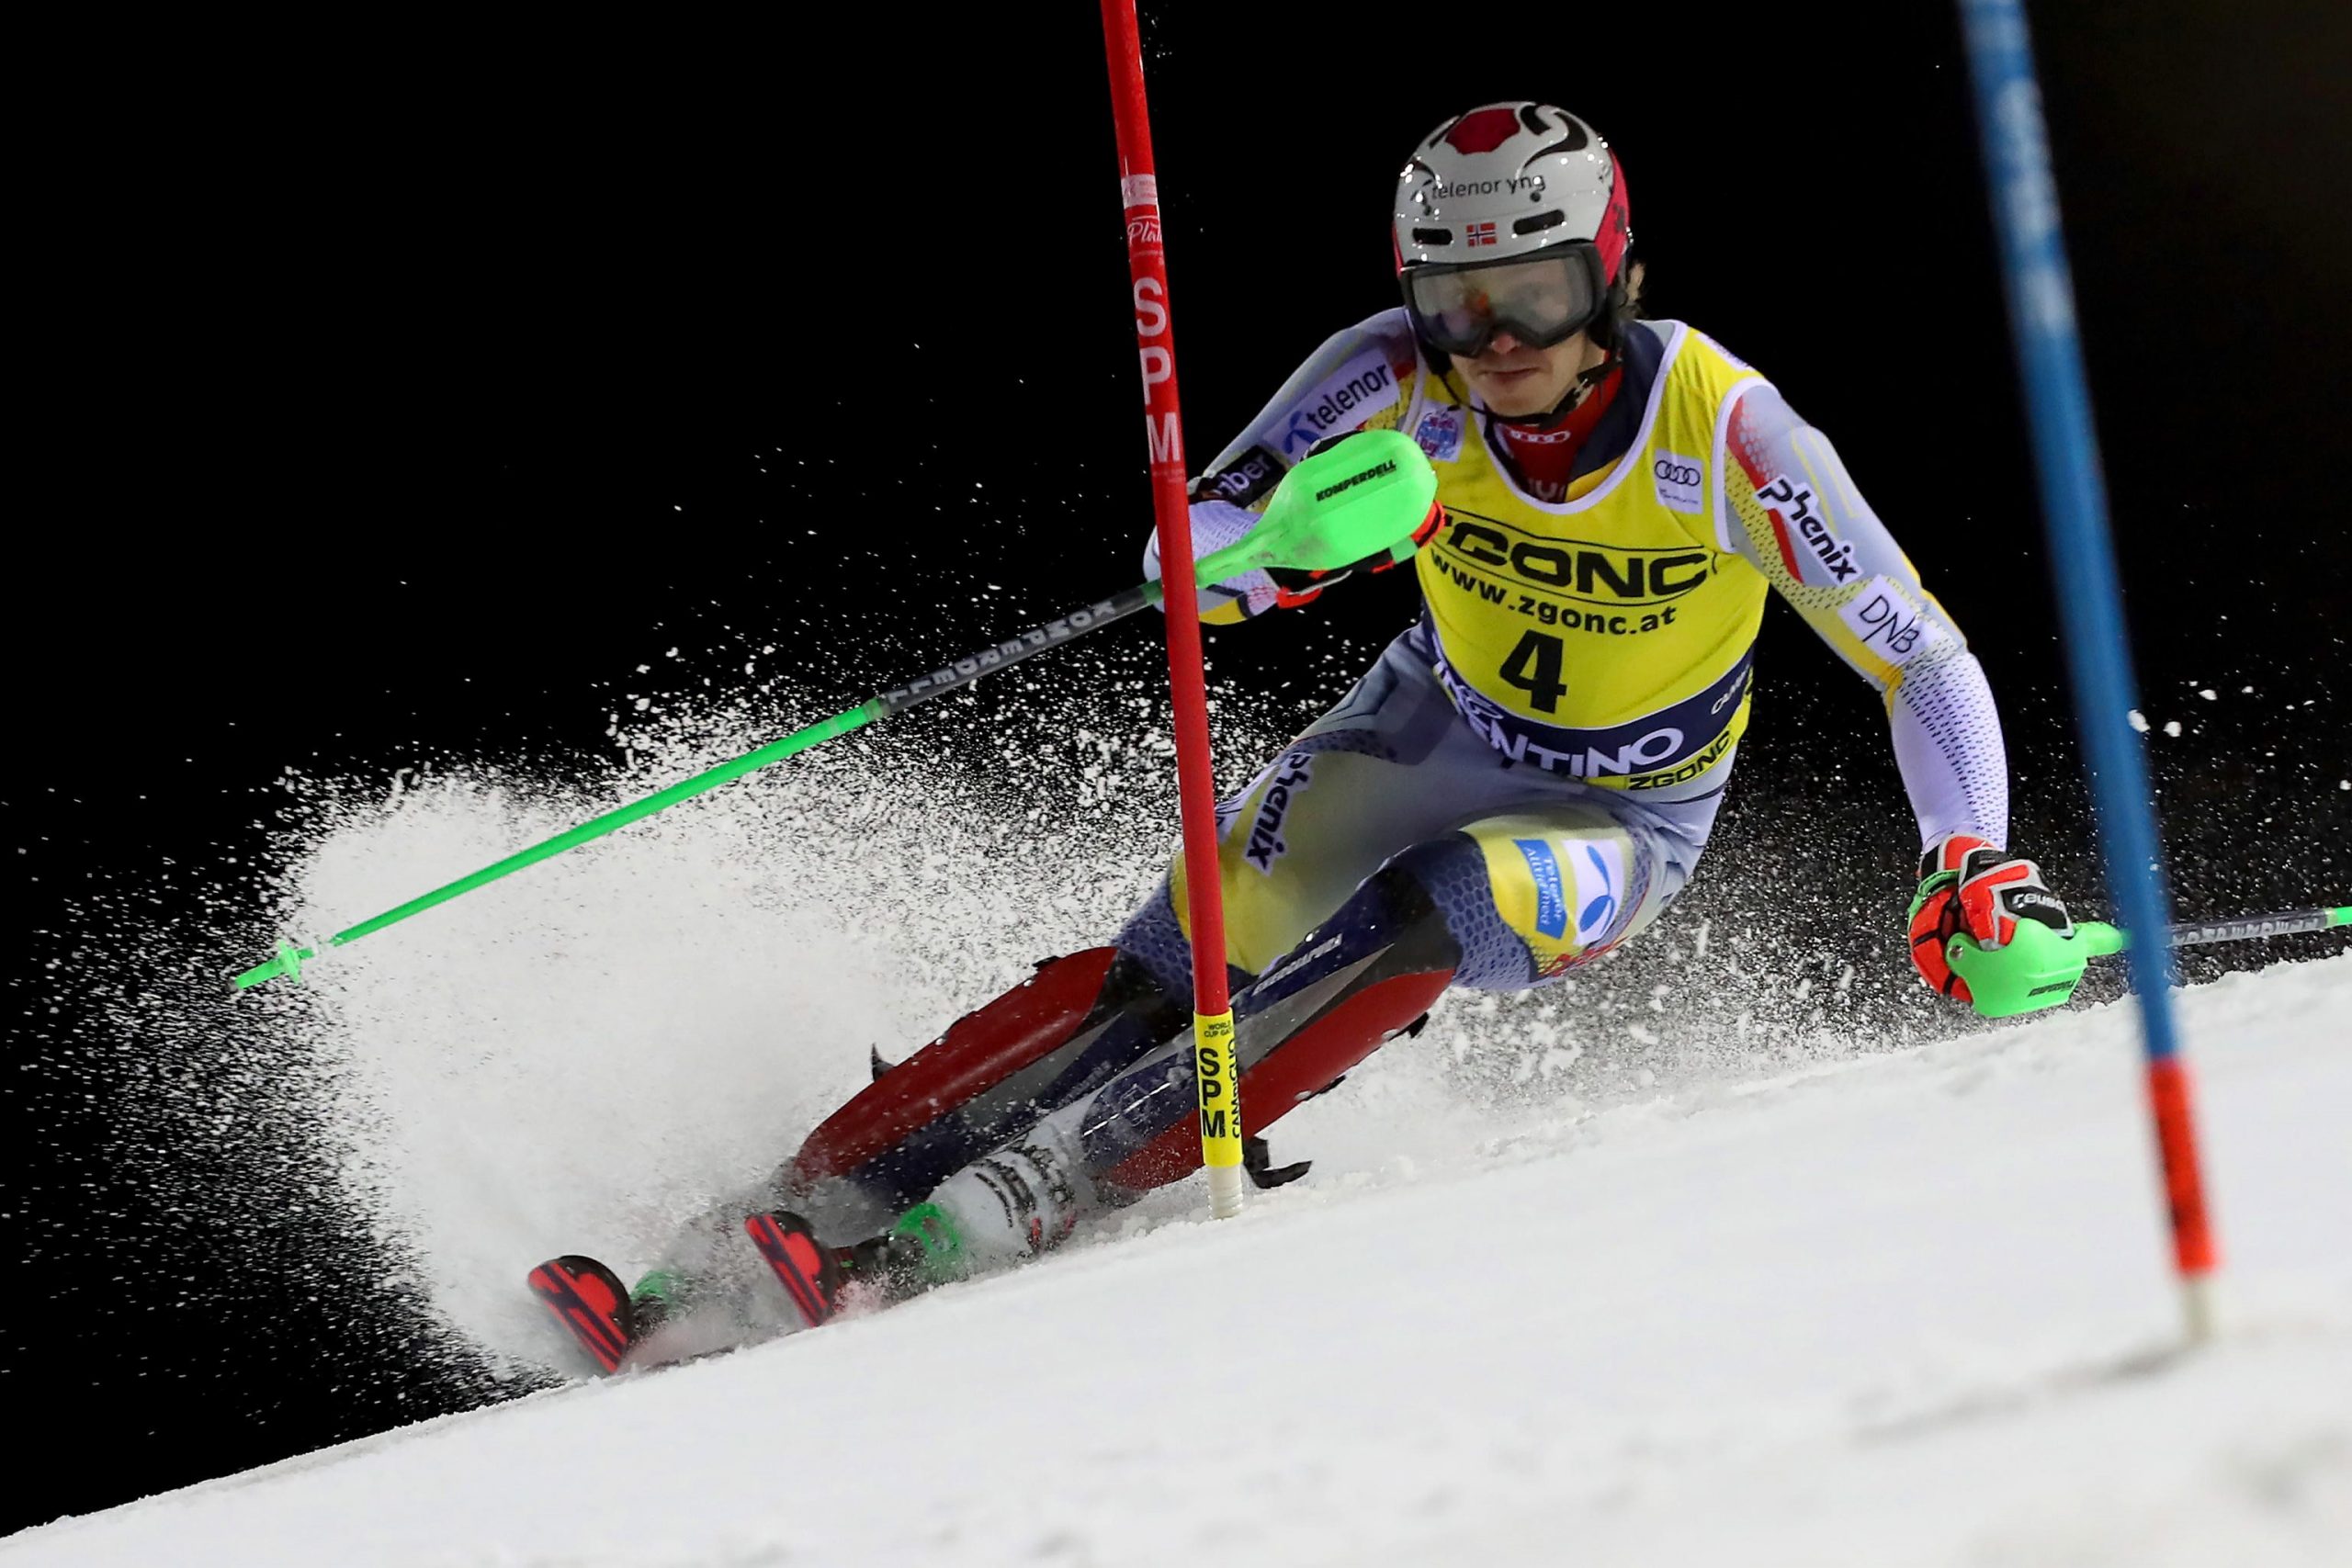 epa08899924 Henrik Kristoffersen of Norway clears a gate during the first run of the Men's Slalom race at the FIS Alpine Skiing World Cup in Madonna di Campiglio, Italy, 22 December 2020.  EPA/ANDREA SOLERO